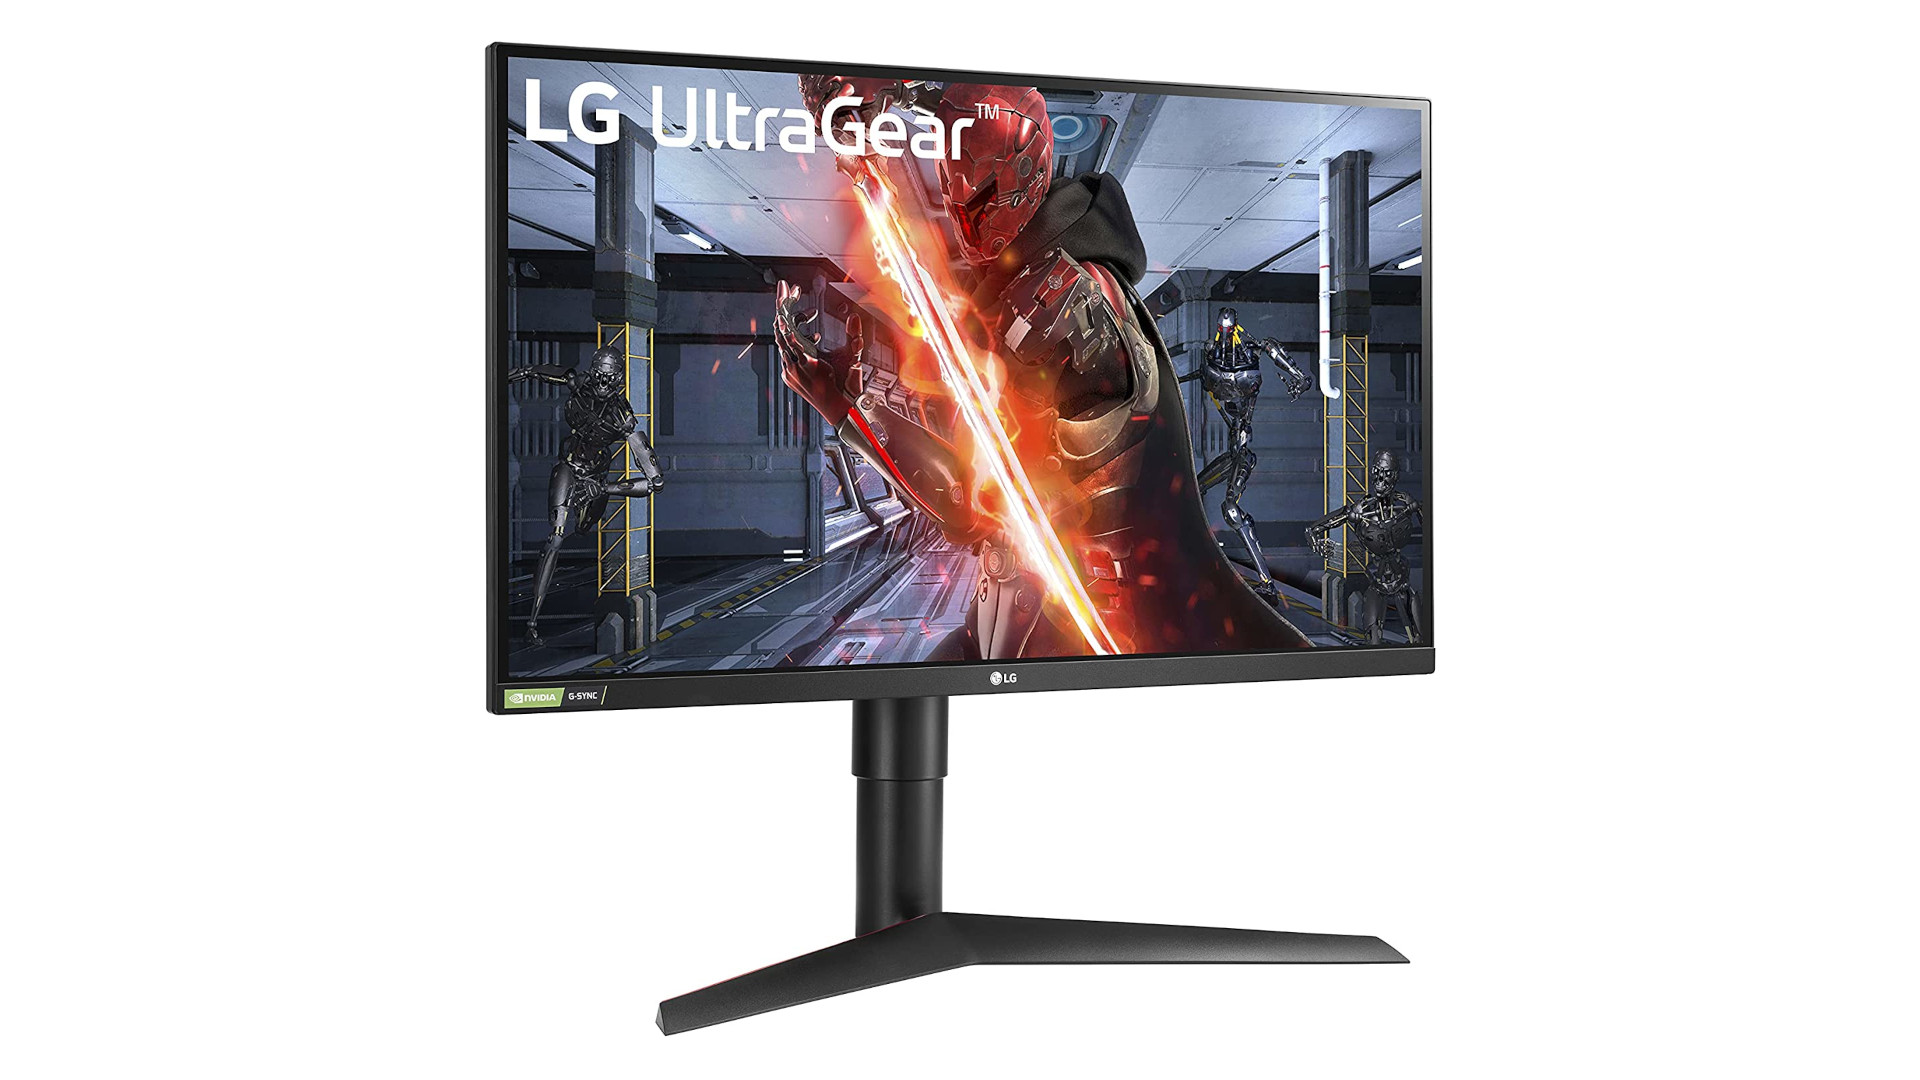 Our favourite LG gaming monitor is $110 off on Amazon